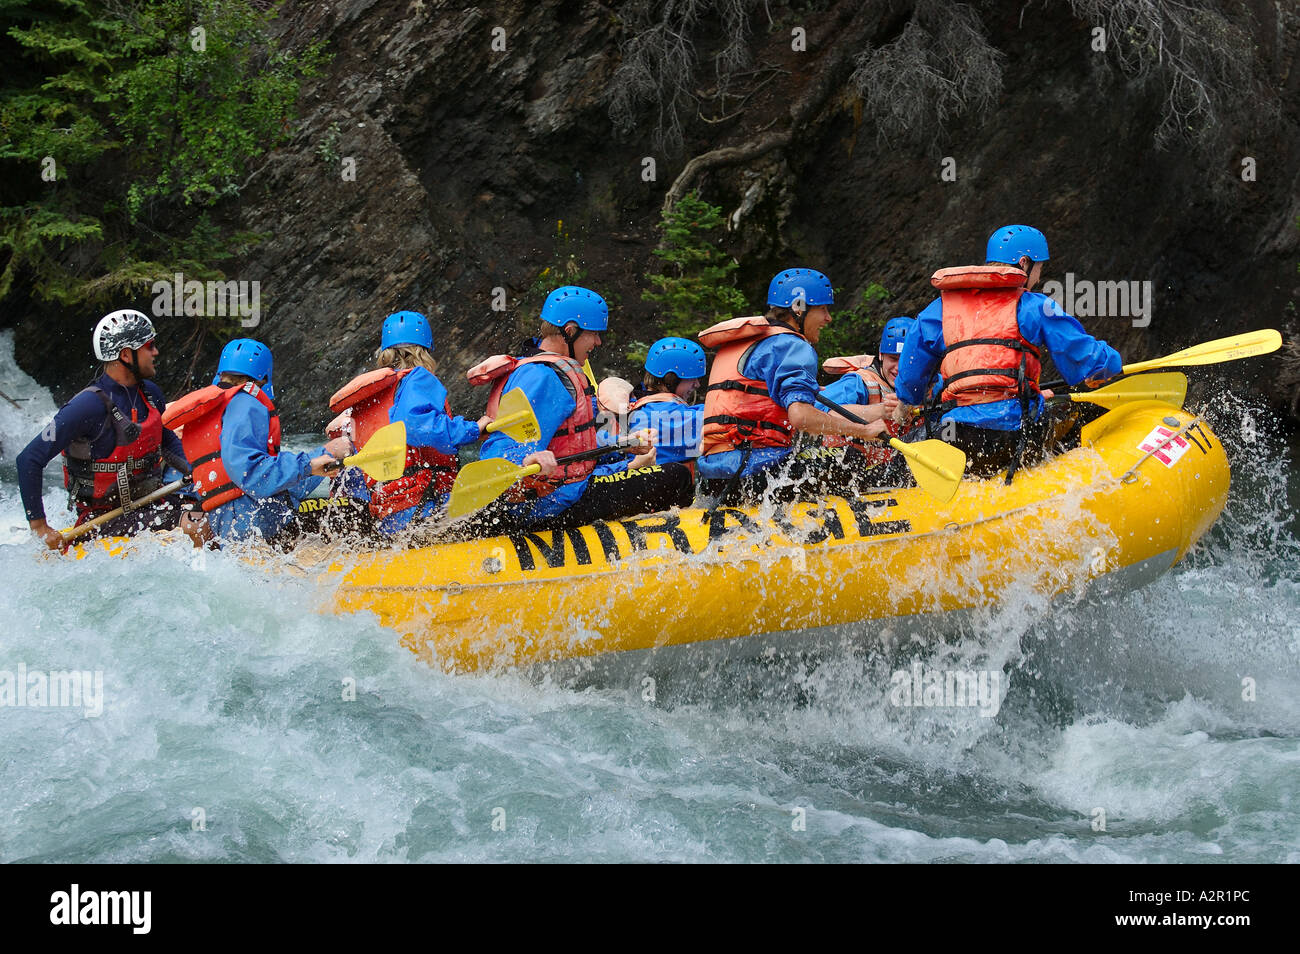 Riding high while white water rafting on cold Kananaskis river Canoe Meadows Alberta Canada Stock Photo